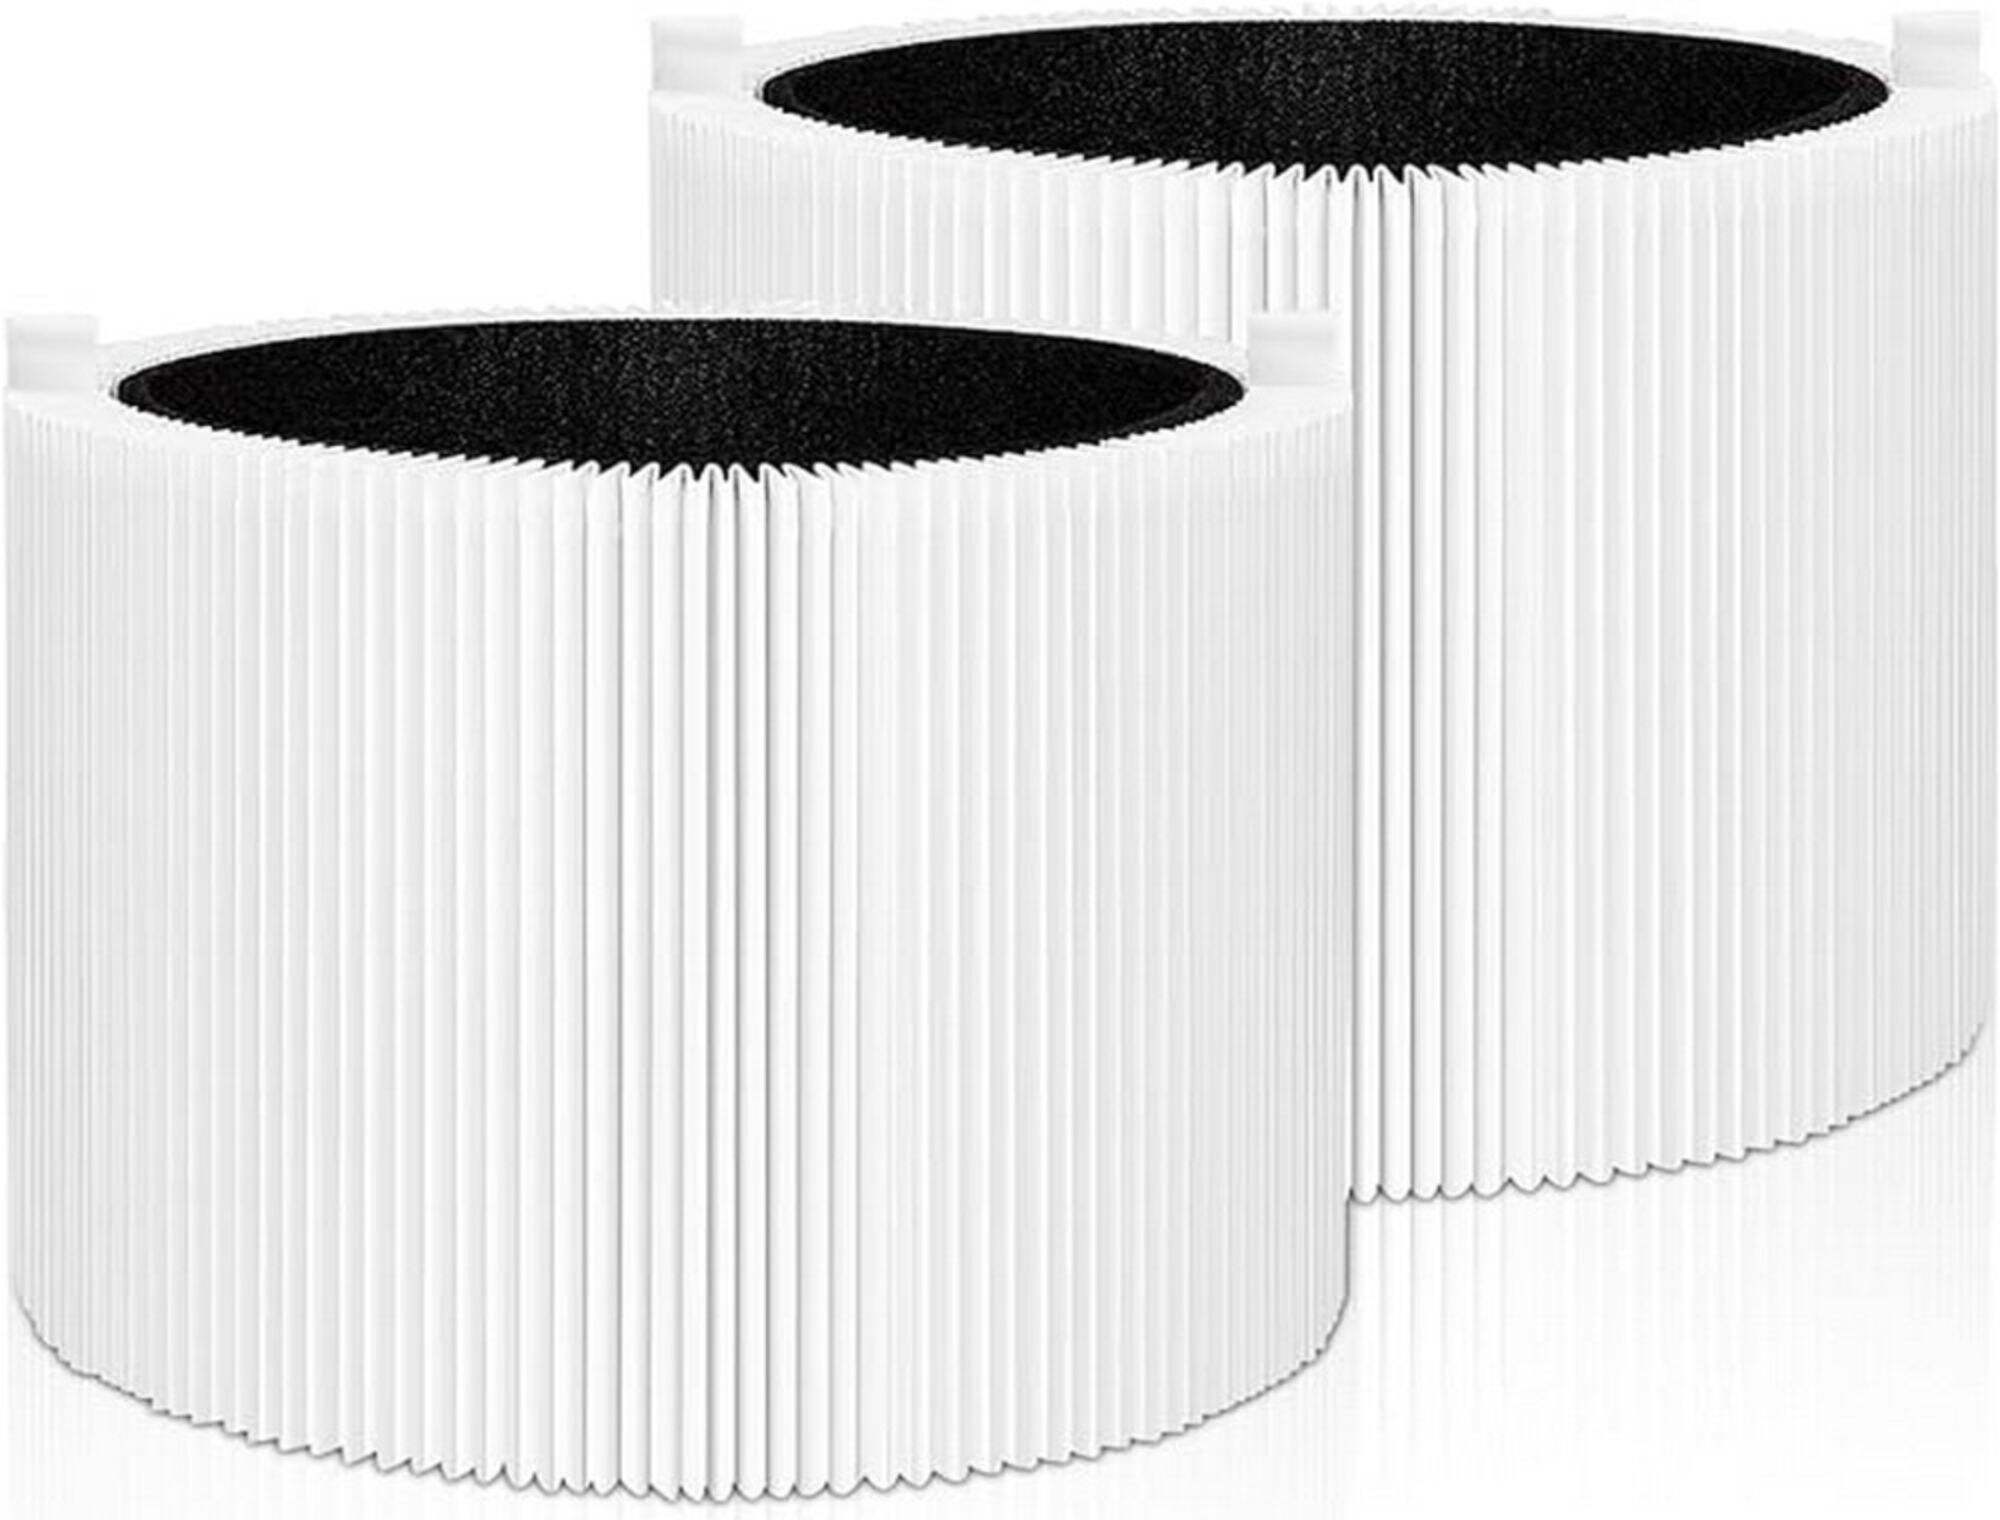 Hfilters H13 replacement anti bacterial hepa filter for blueair 311I Max with carbon